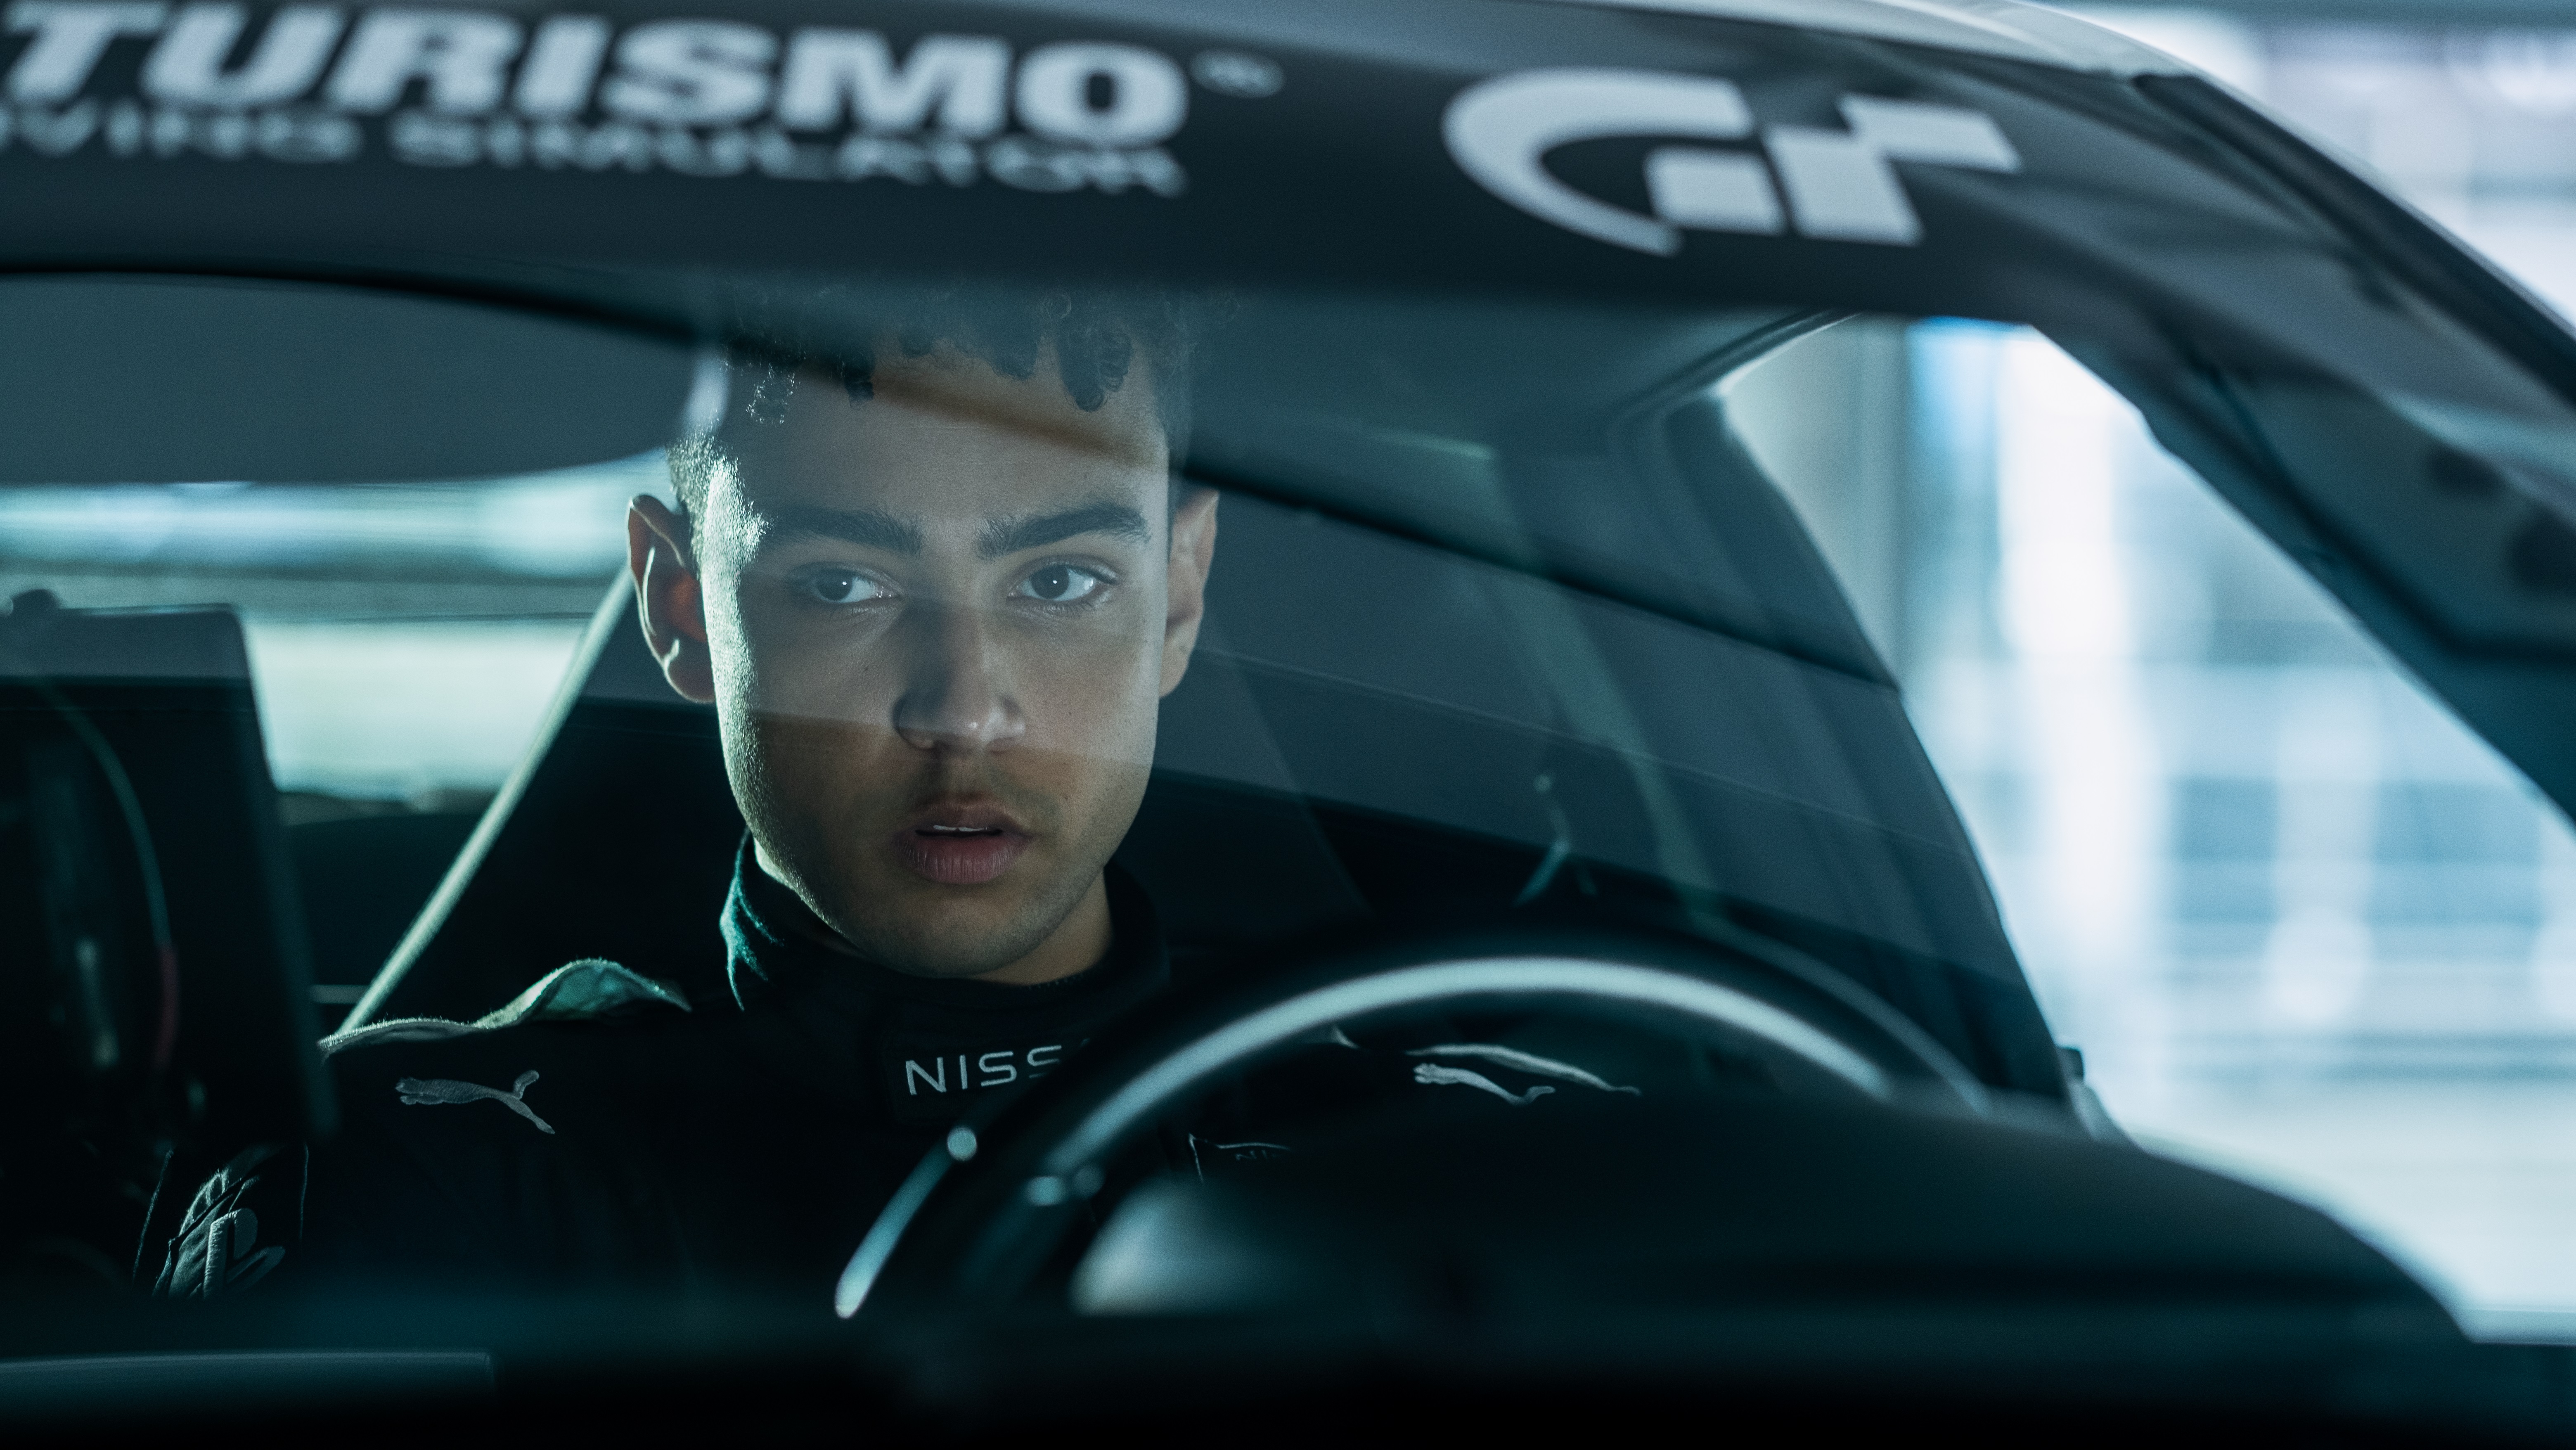 Archie Madekwe as Jann Mardenboroguh behind the wheel of a car with a Gran Turismo decal on the windscreen